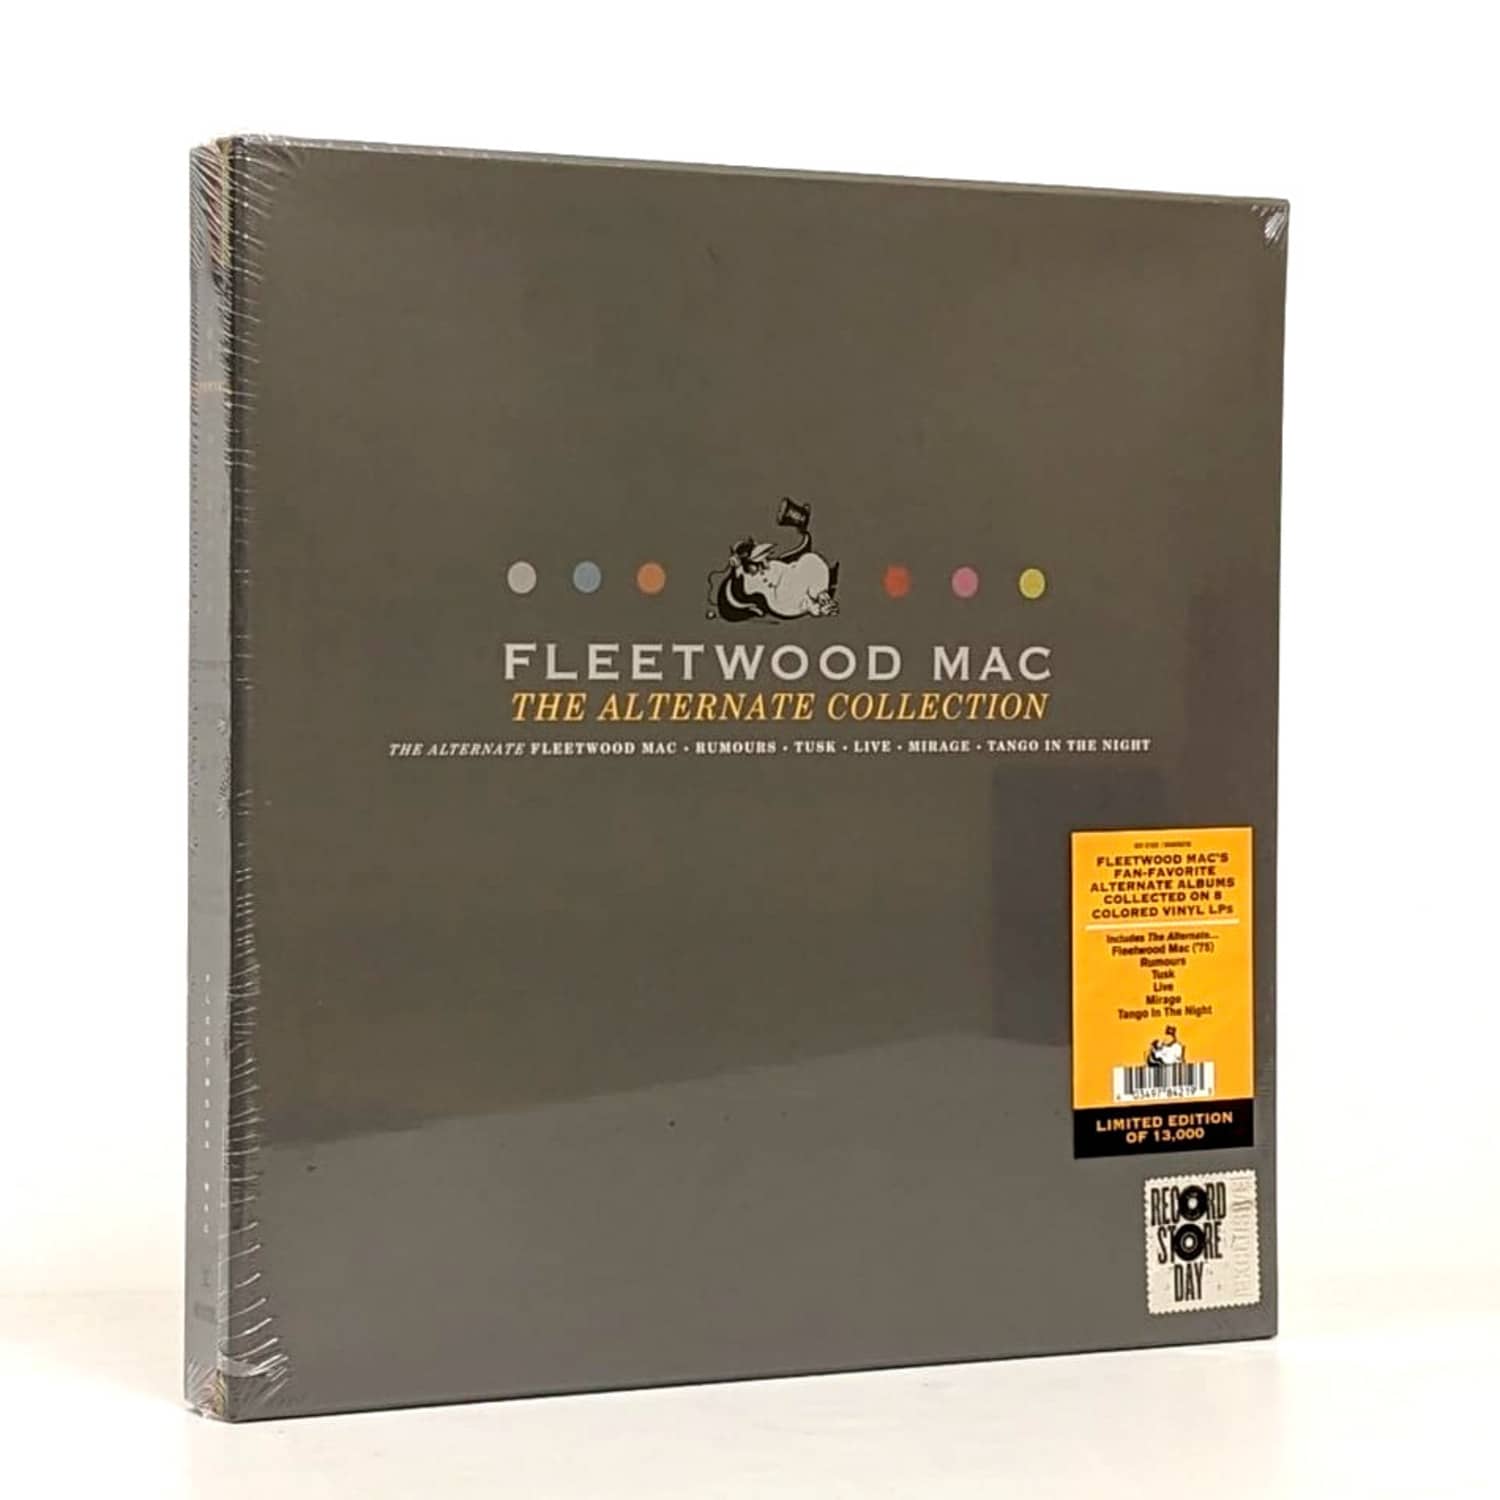 Fleetwood Mac - THE ALTERNATE COLLECTION 